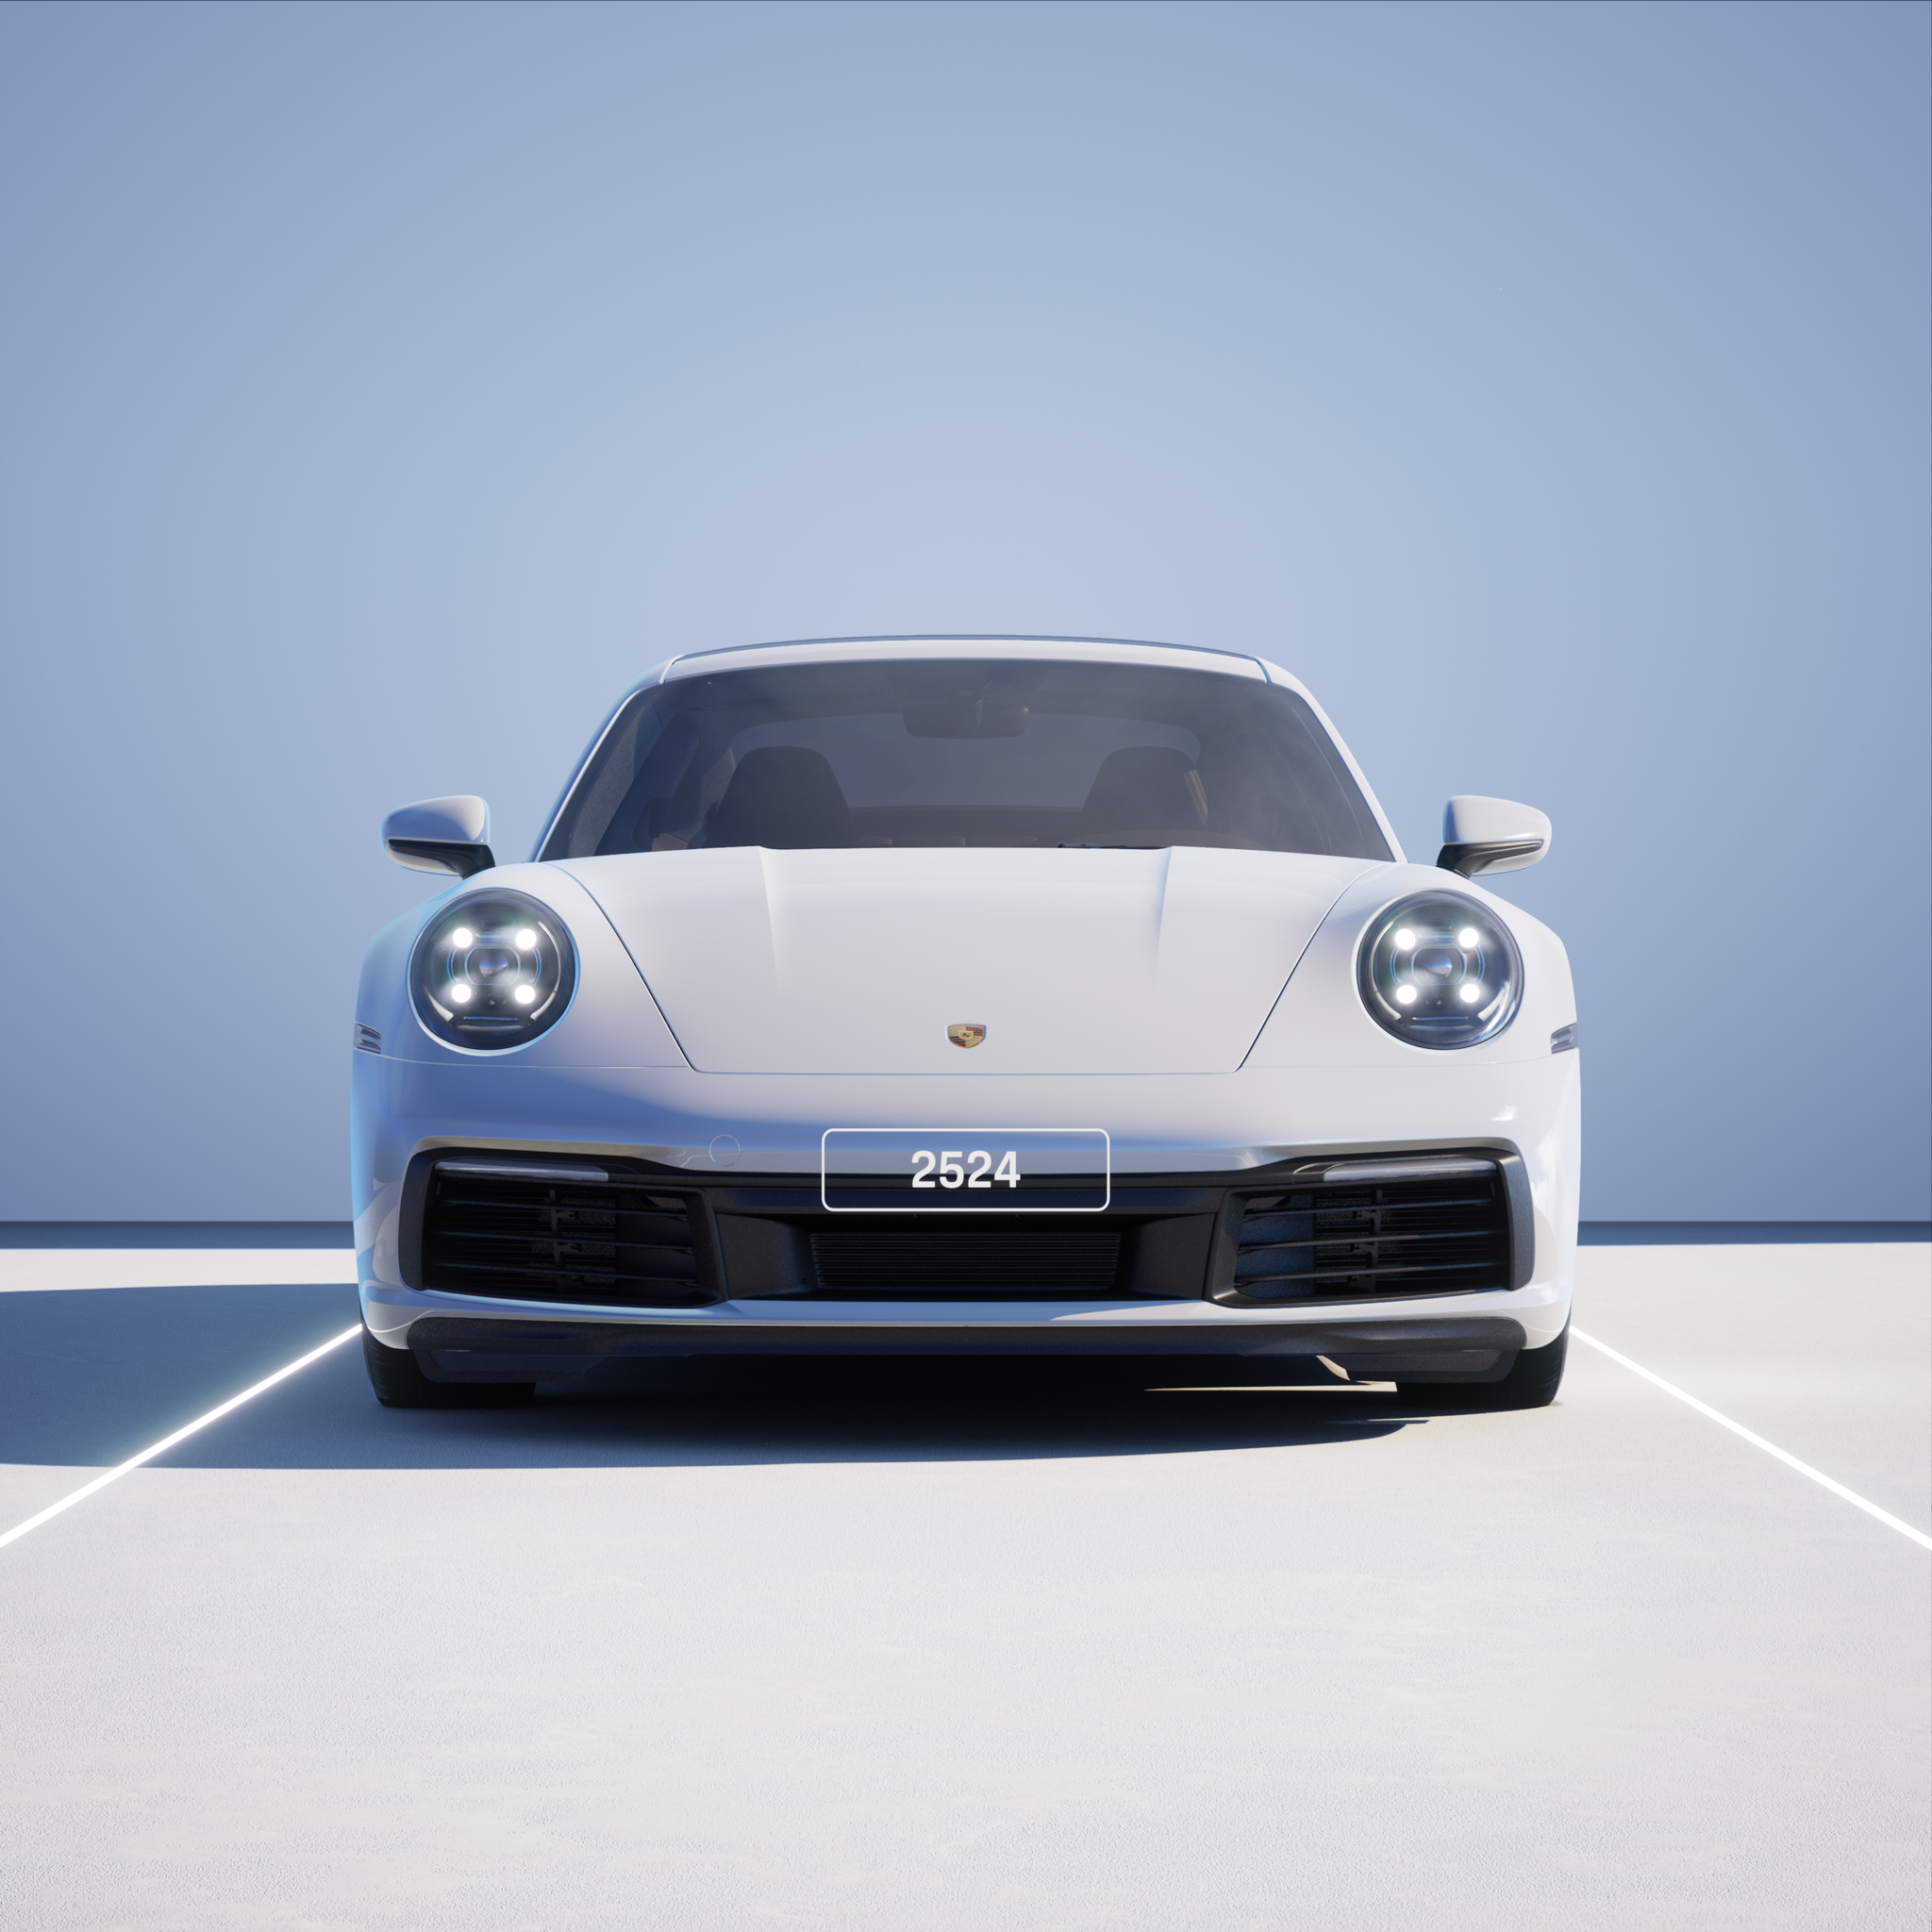 The PORSCHΞ 911 2524 image in phase